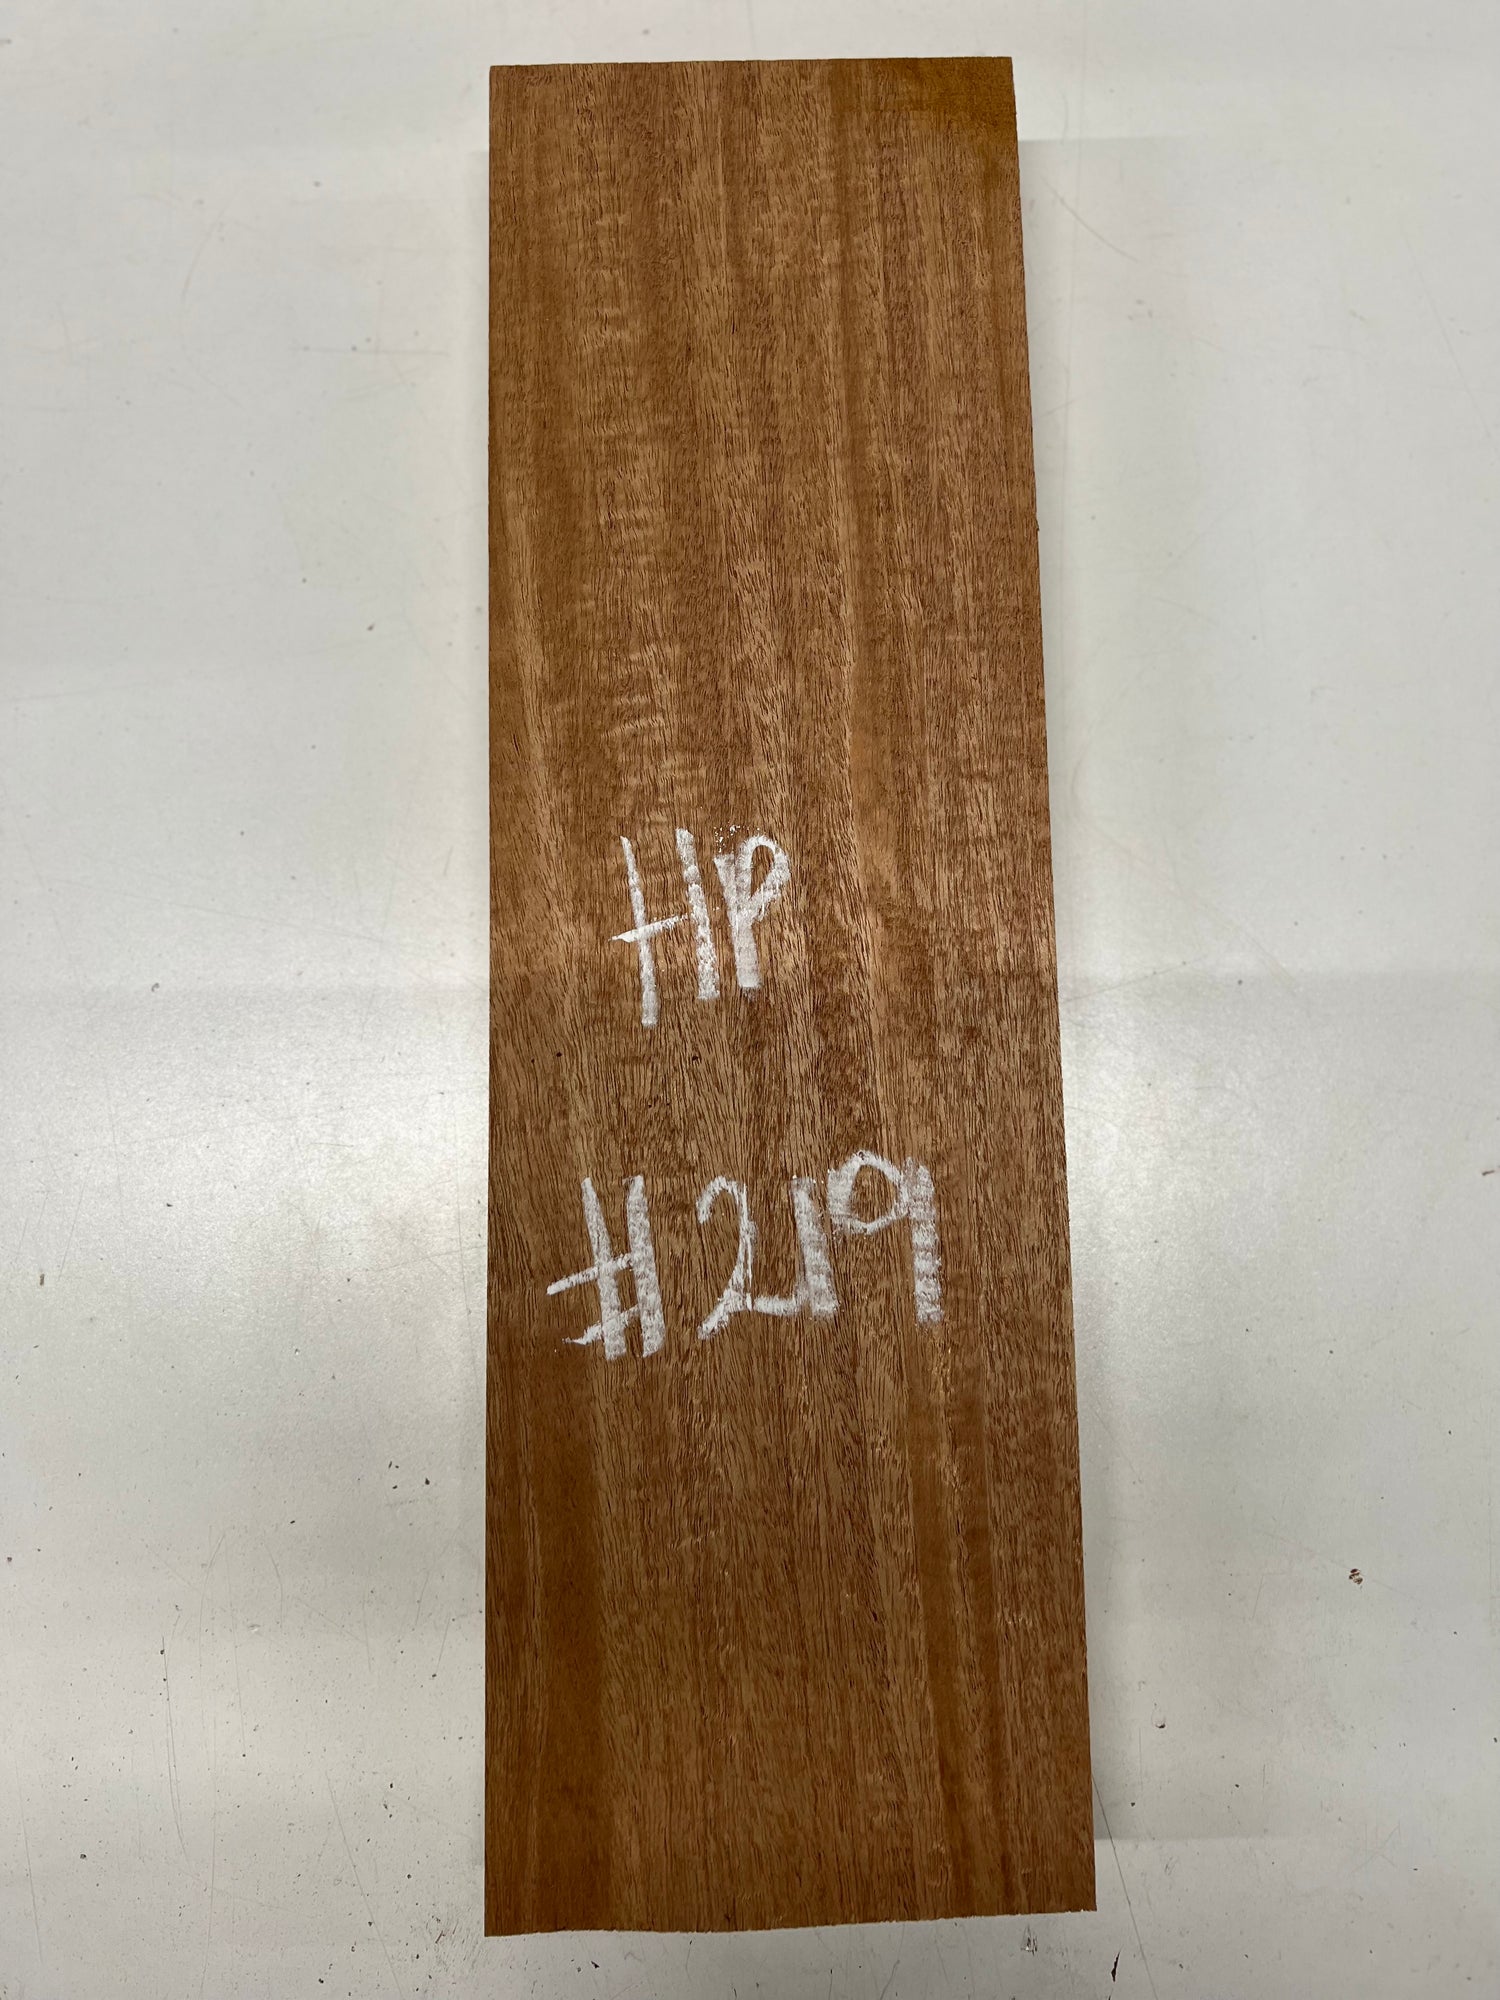 Flame African Mahogany Lumber Board Blank 20&quot;x 6-1/2&quot;x 1-7/8&quot; 